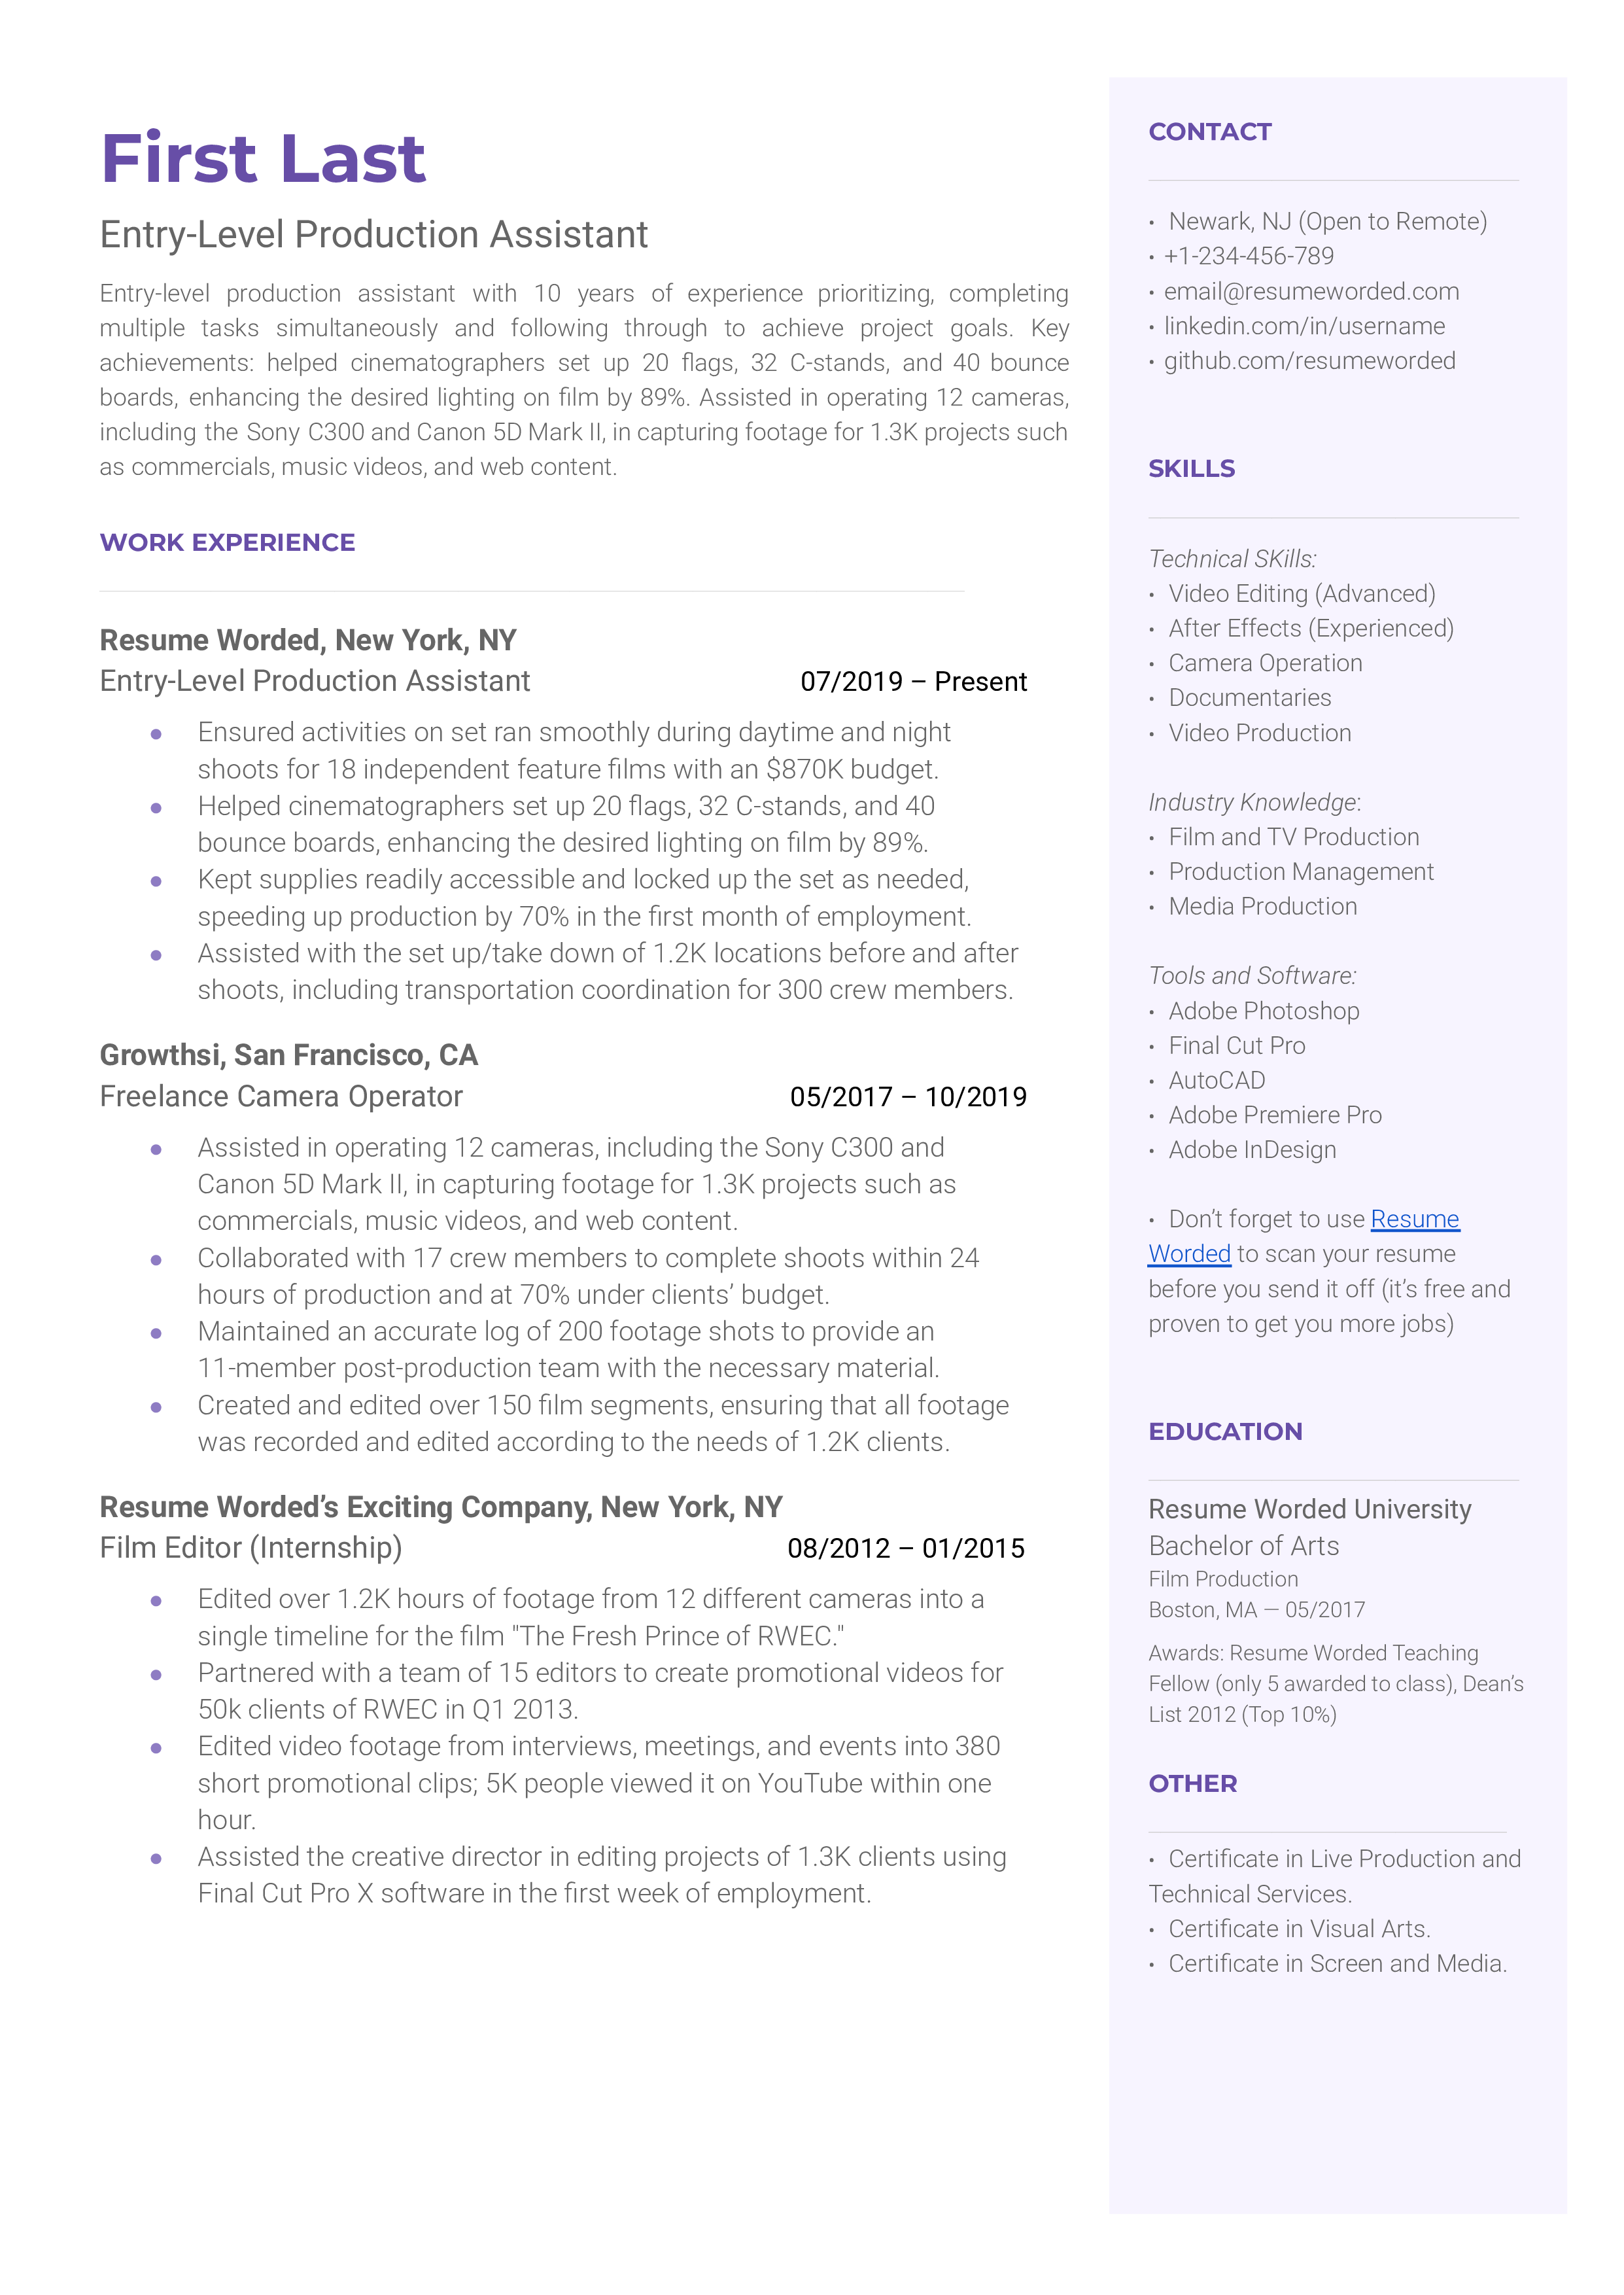 A resume for an entry level production assistant with a degree in film production and experience as film editor intern and camera operator.